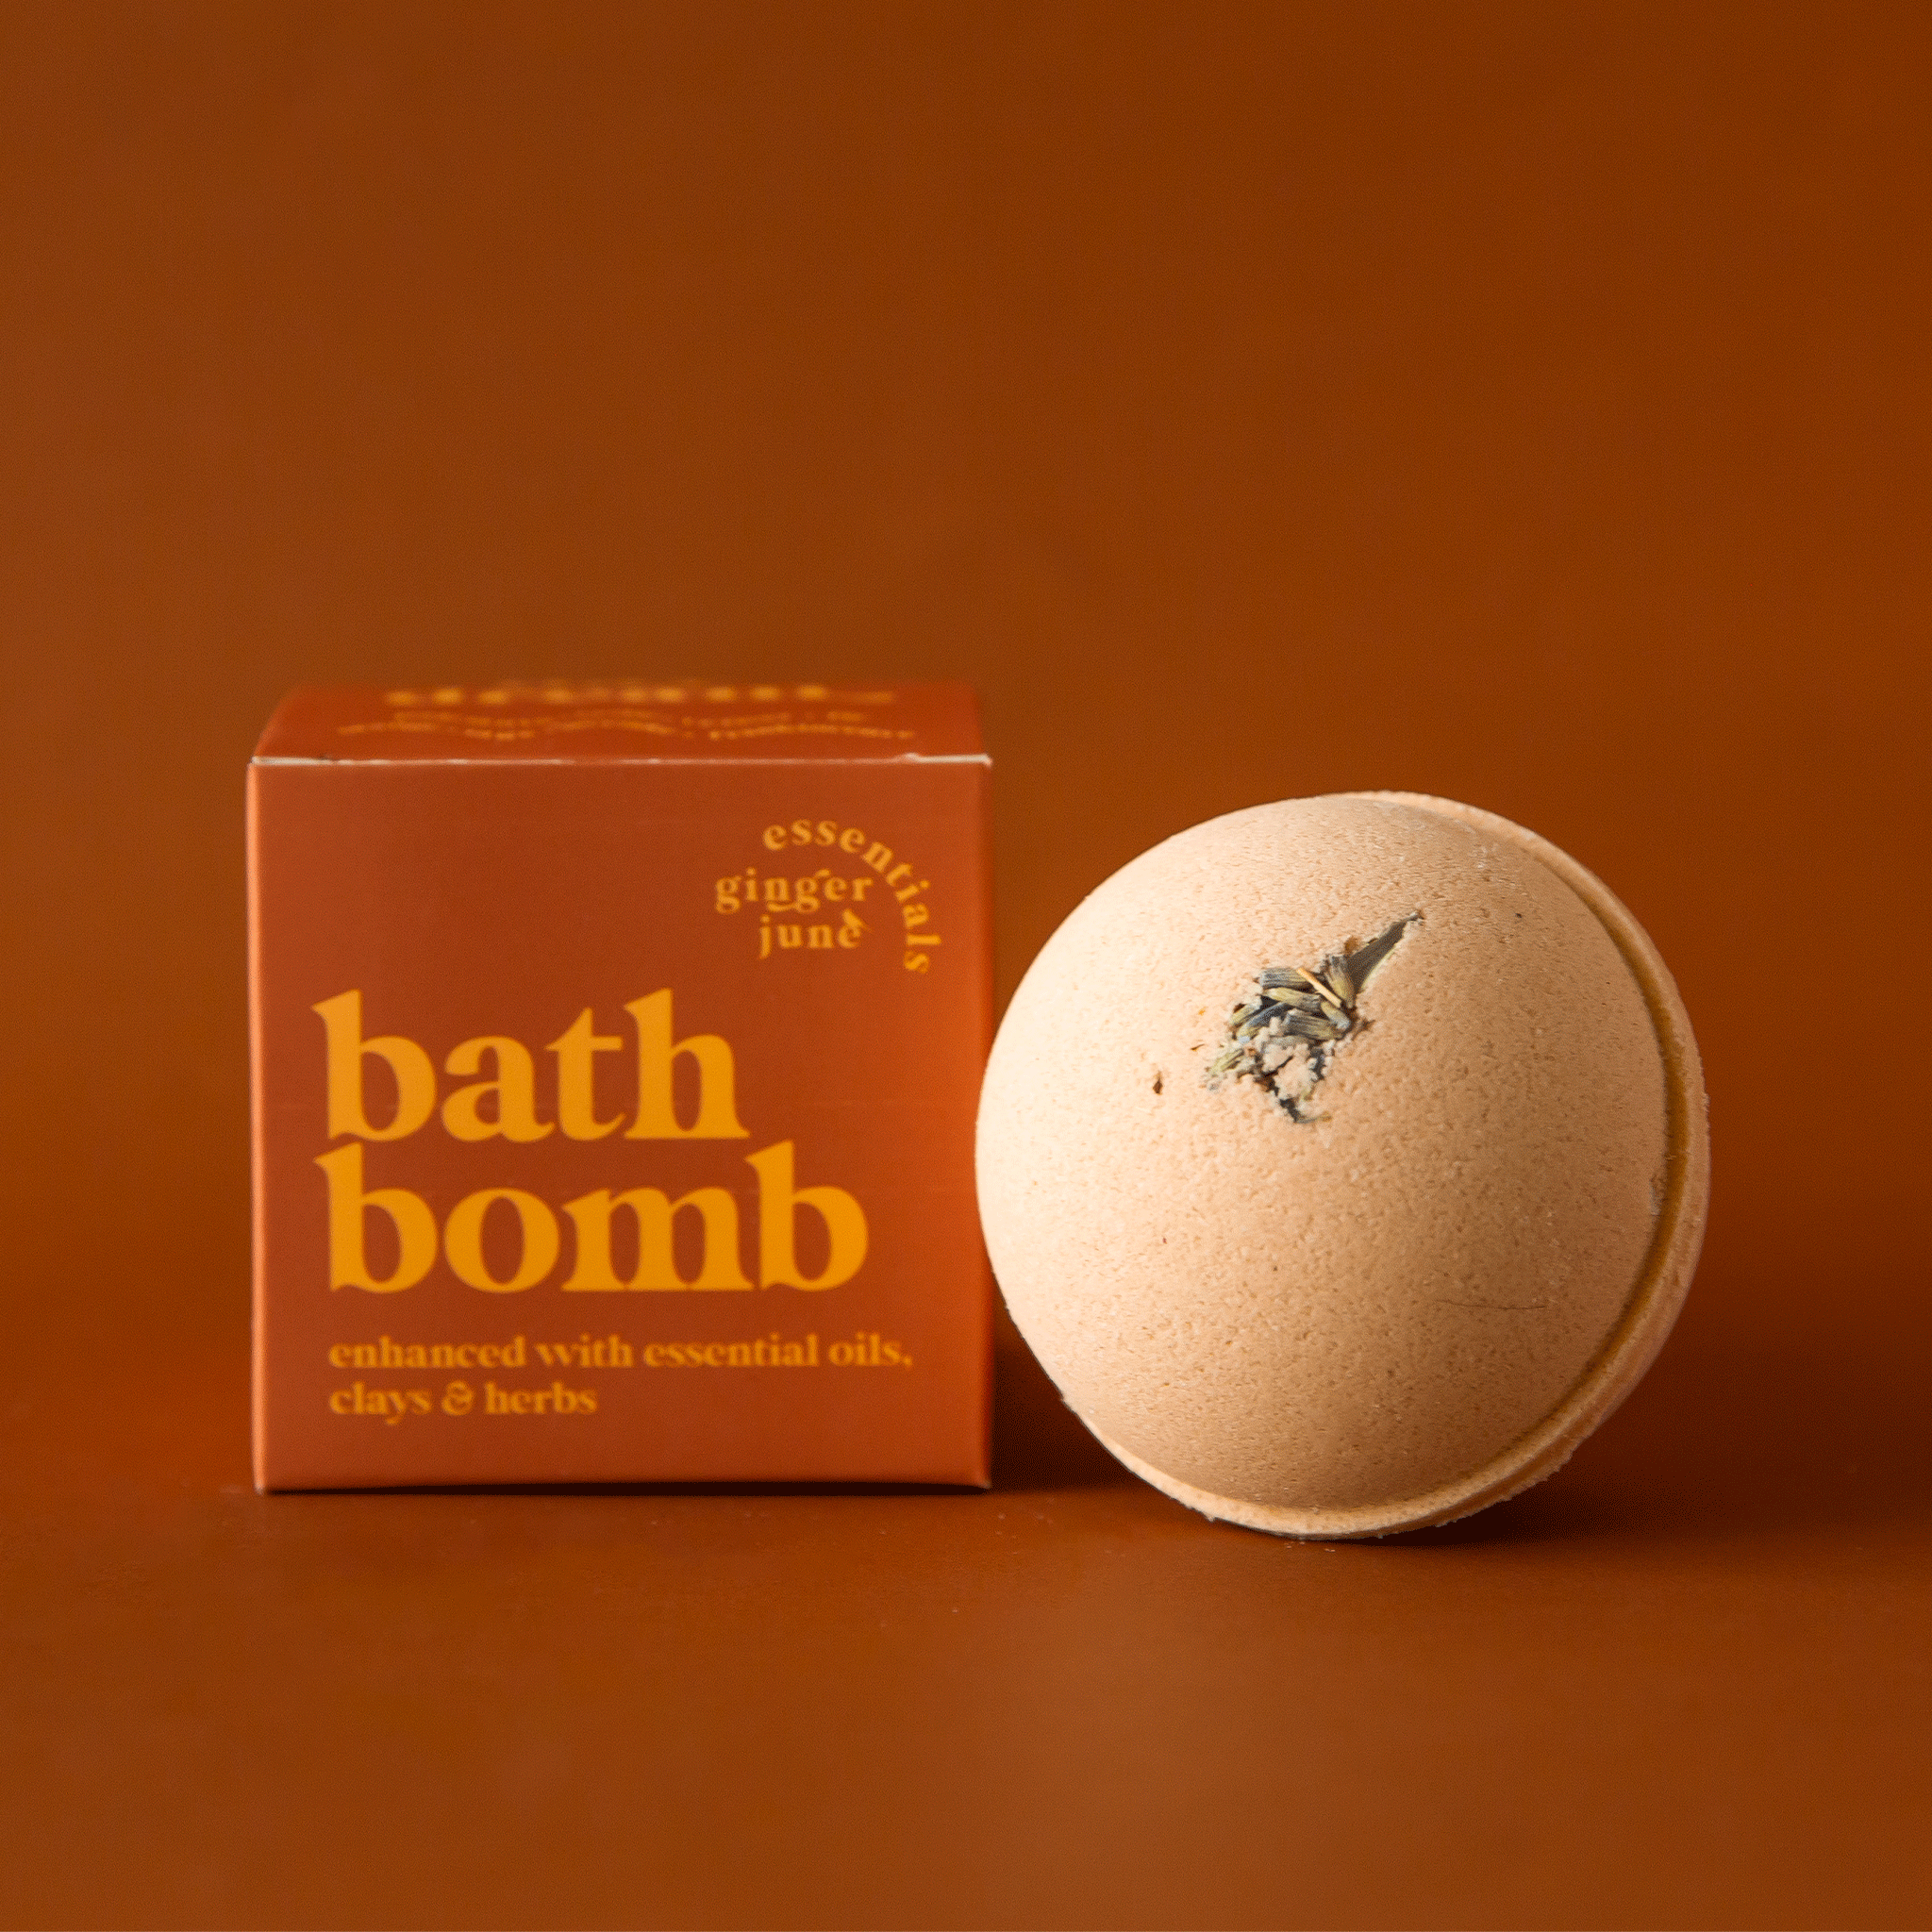 On a burnt orange background is a round bath bomb with an orange hue and a orange box with yellow text that reads, &quot;bath bomb enhanced with essential oils, clays &amp; herbs&quot;.